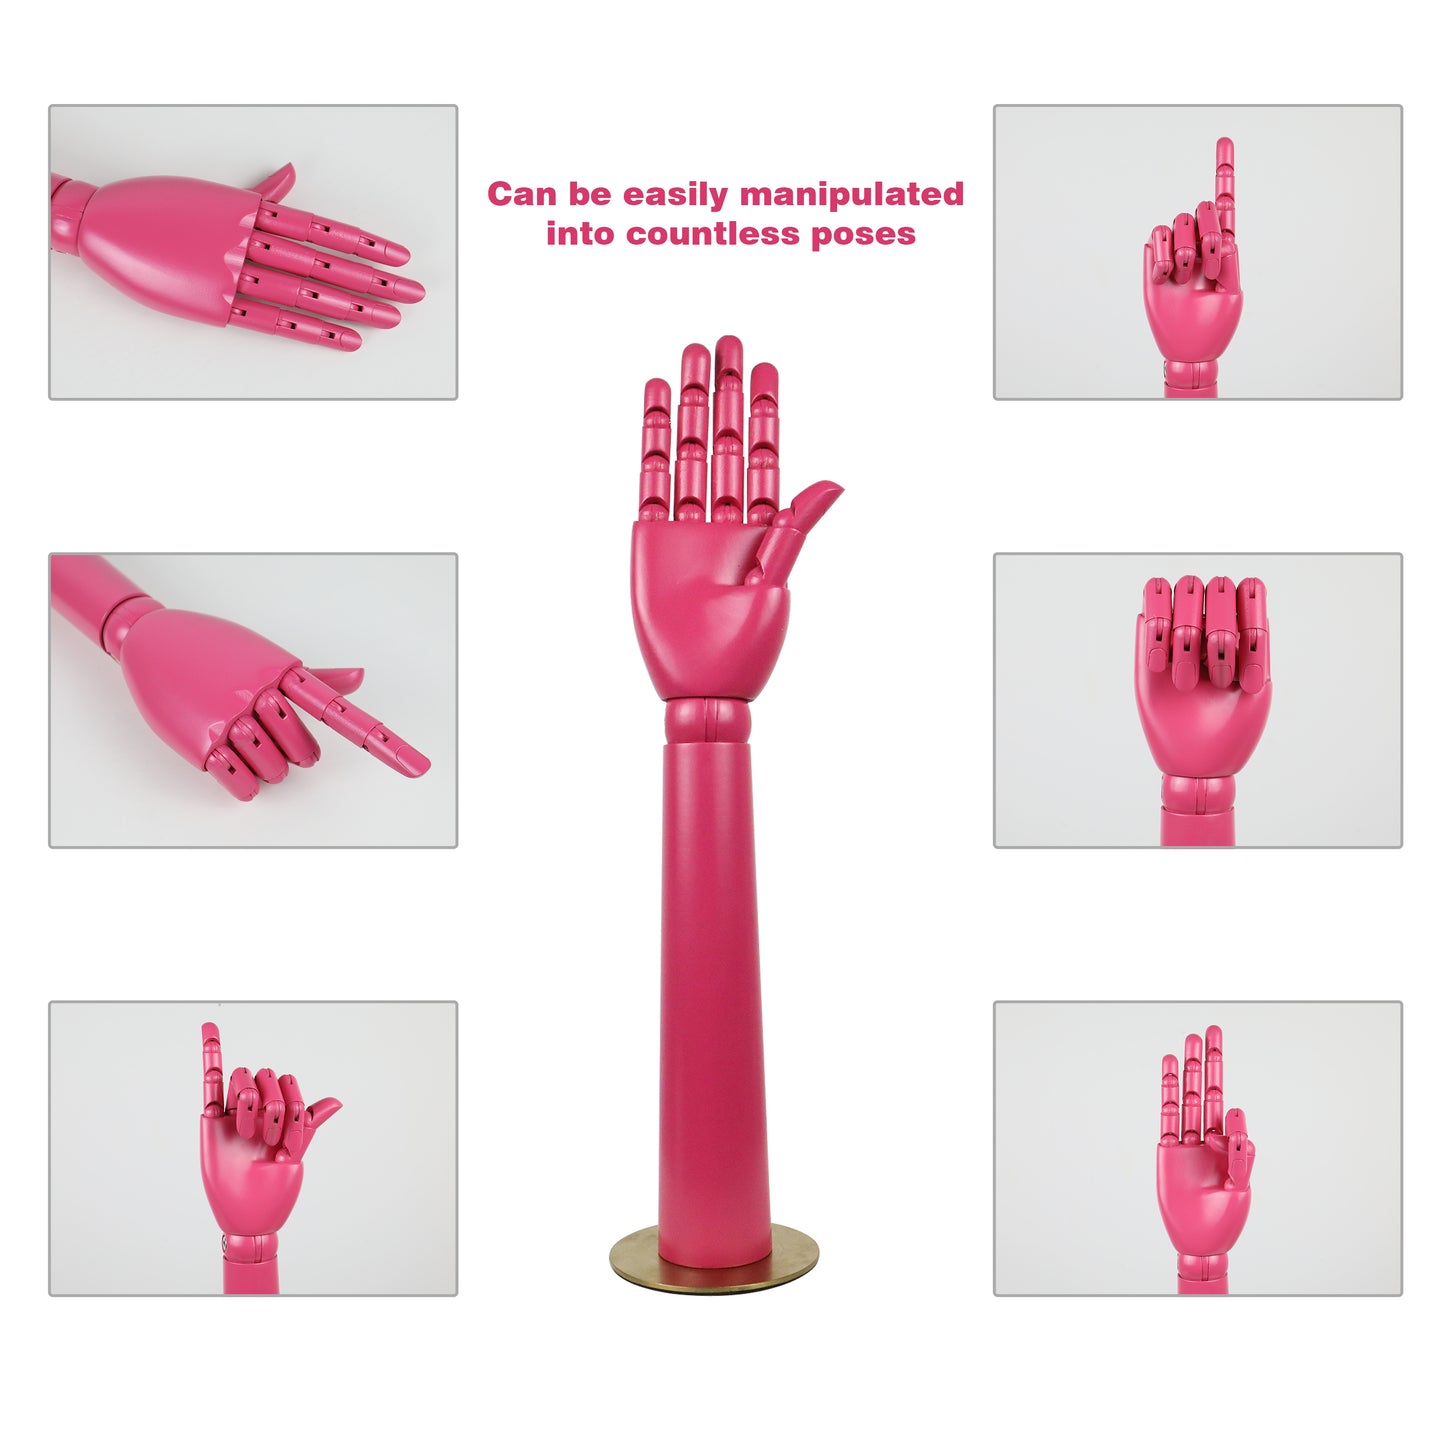 DE-LIANG Colorful Wood Hand Mannequin Right and Left Hands Model Prop, Movable Joints Wooden Hand for Jewelry Display/Table Decoration